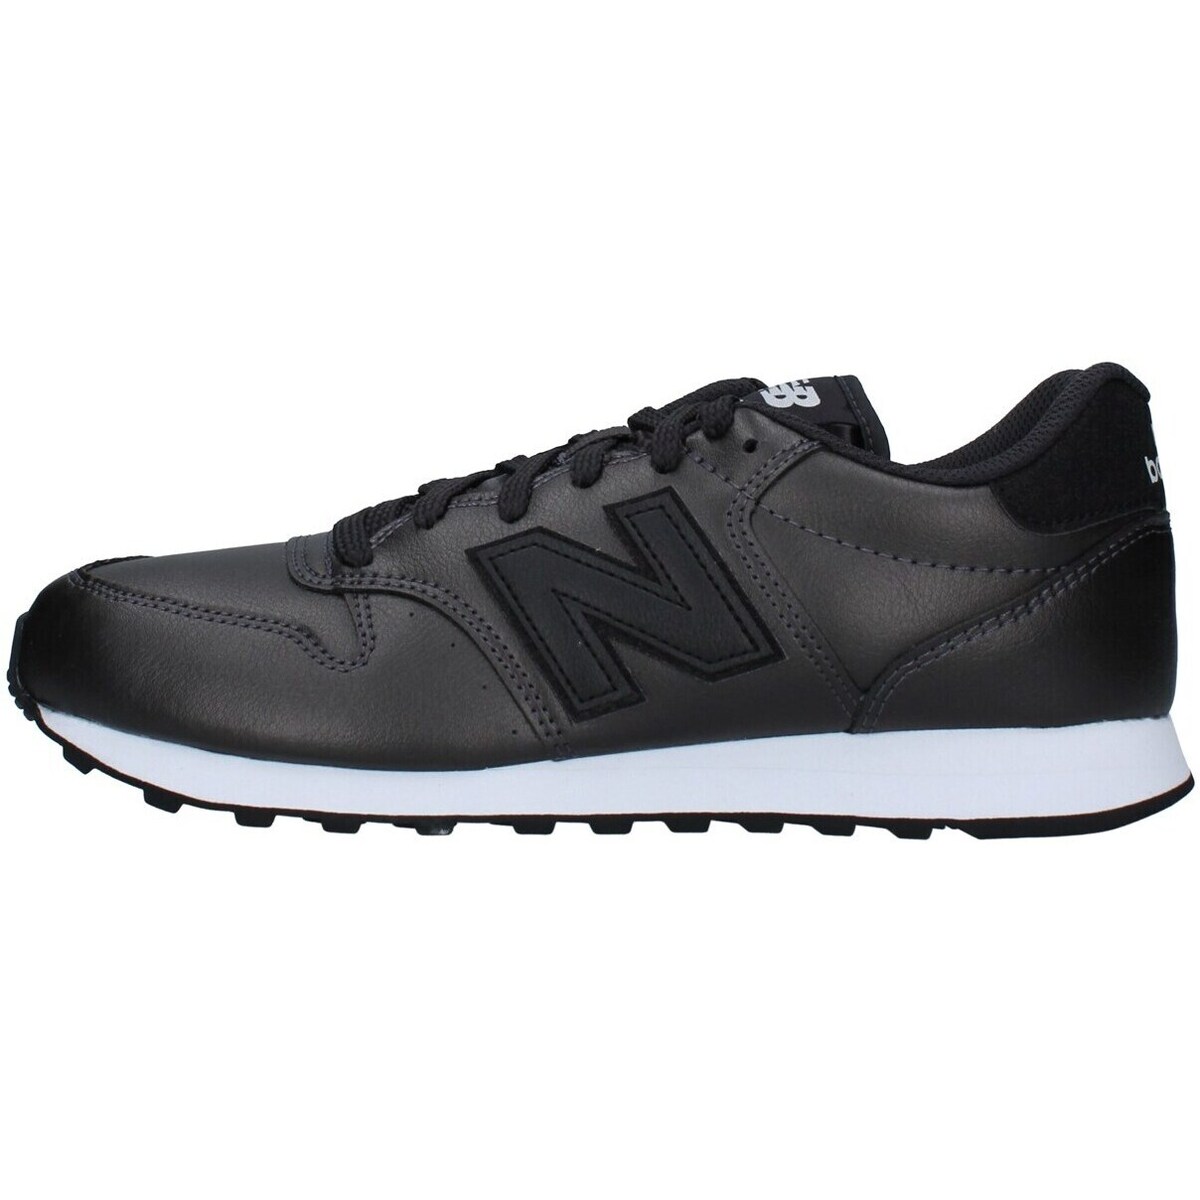 Chaussures Femme Stone Island New Balance FuelCell RC Elite V2 Energy Red GW500GB2 Noir